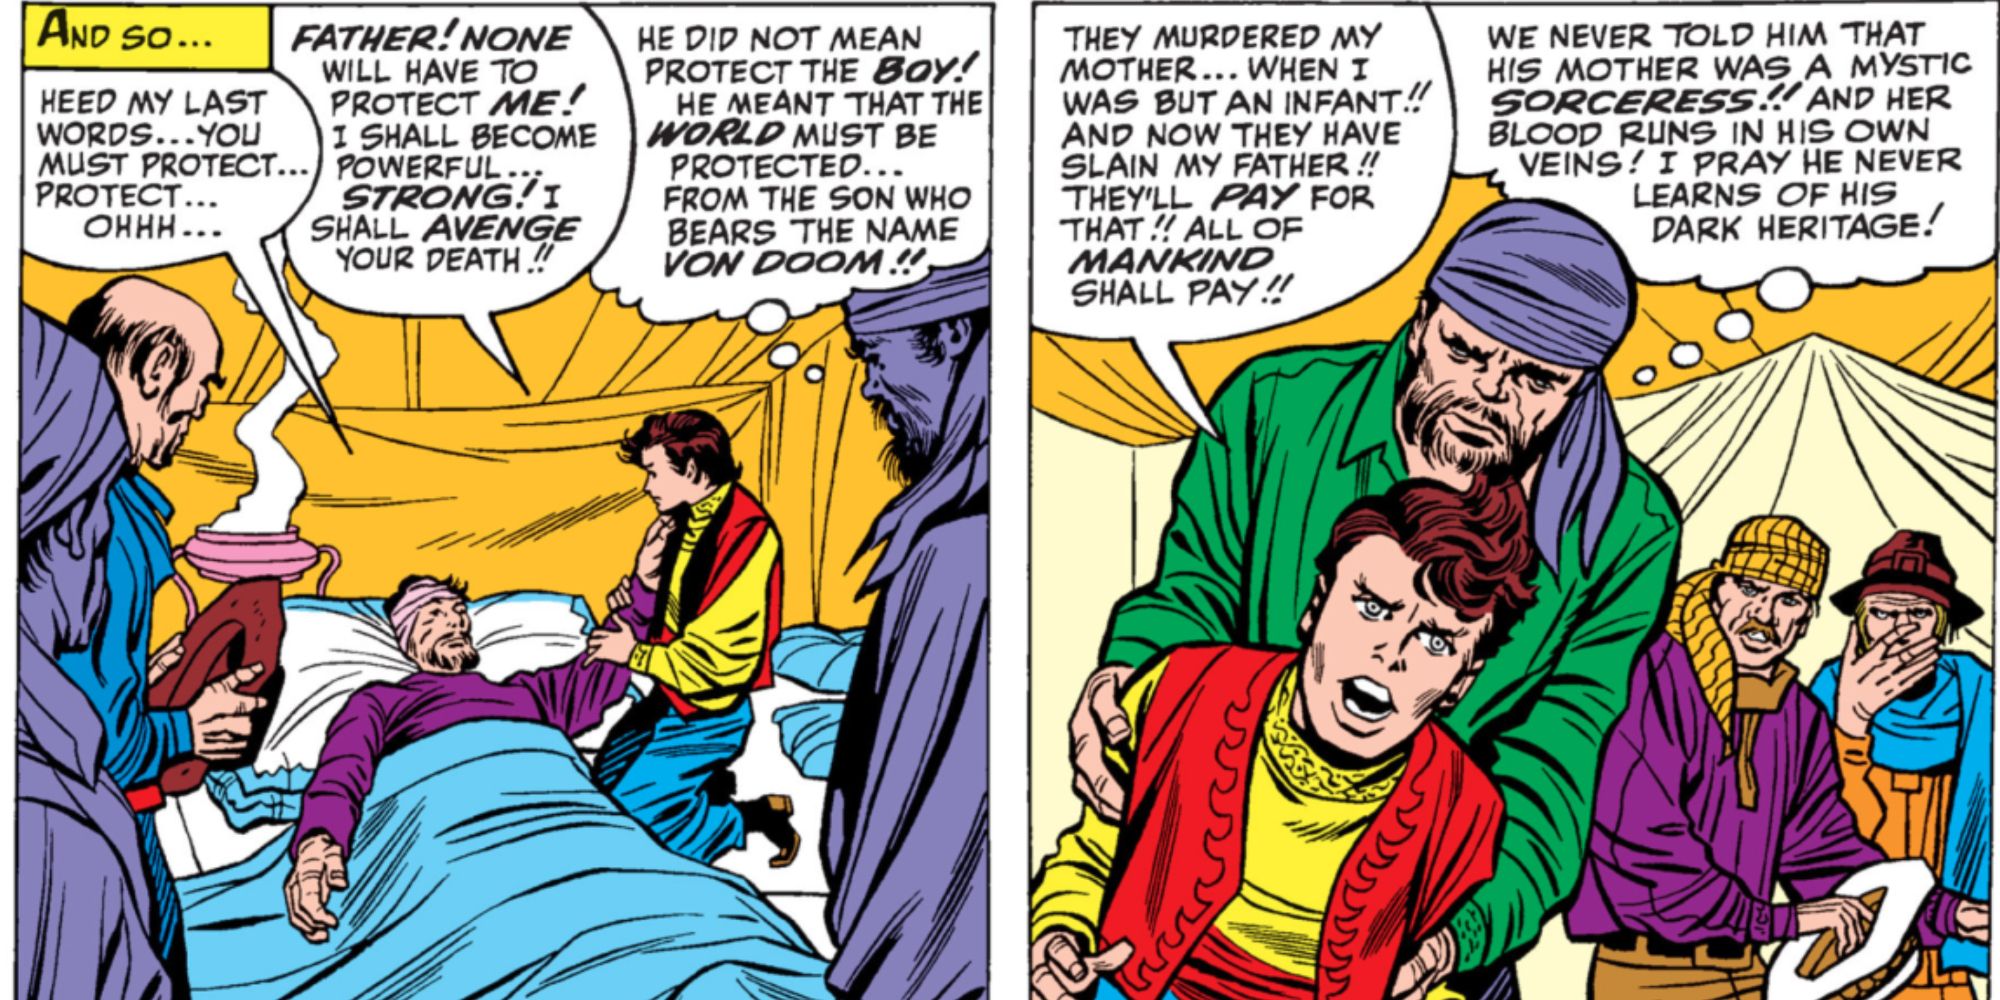 Doom at the death of his father from Marvel Comics